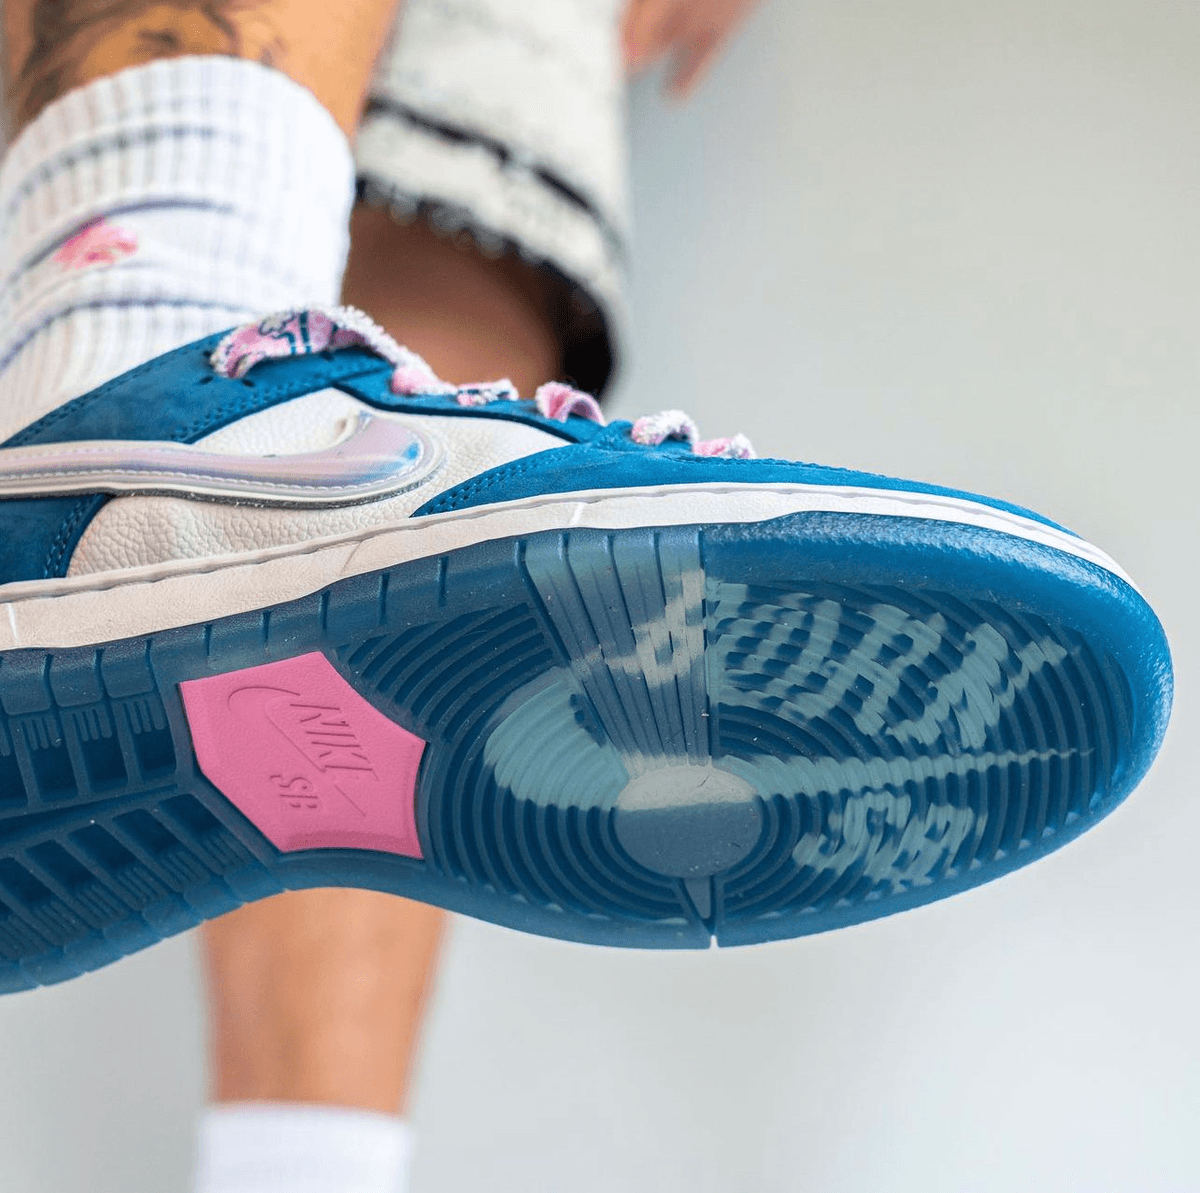 On-Foot Look at the Born x Raised Nike SB Dunk Low In Loving Memory